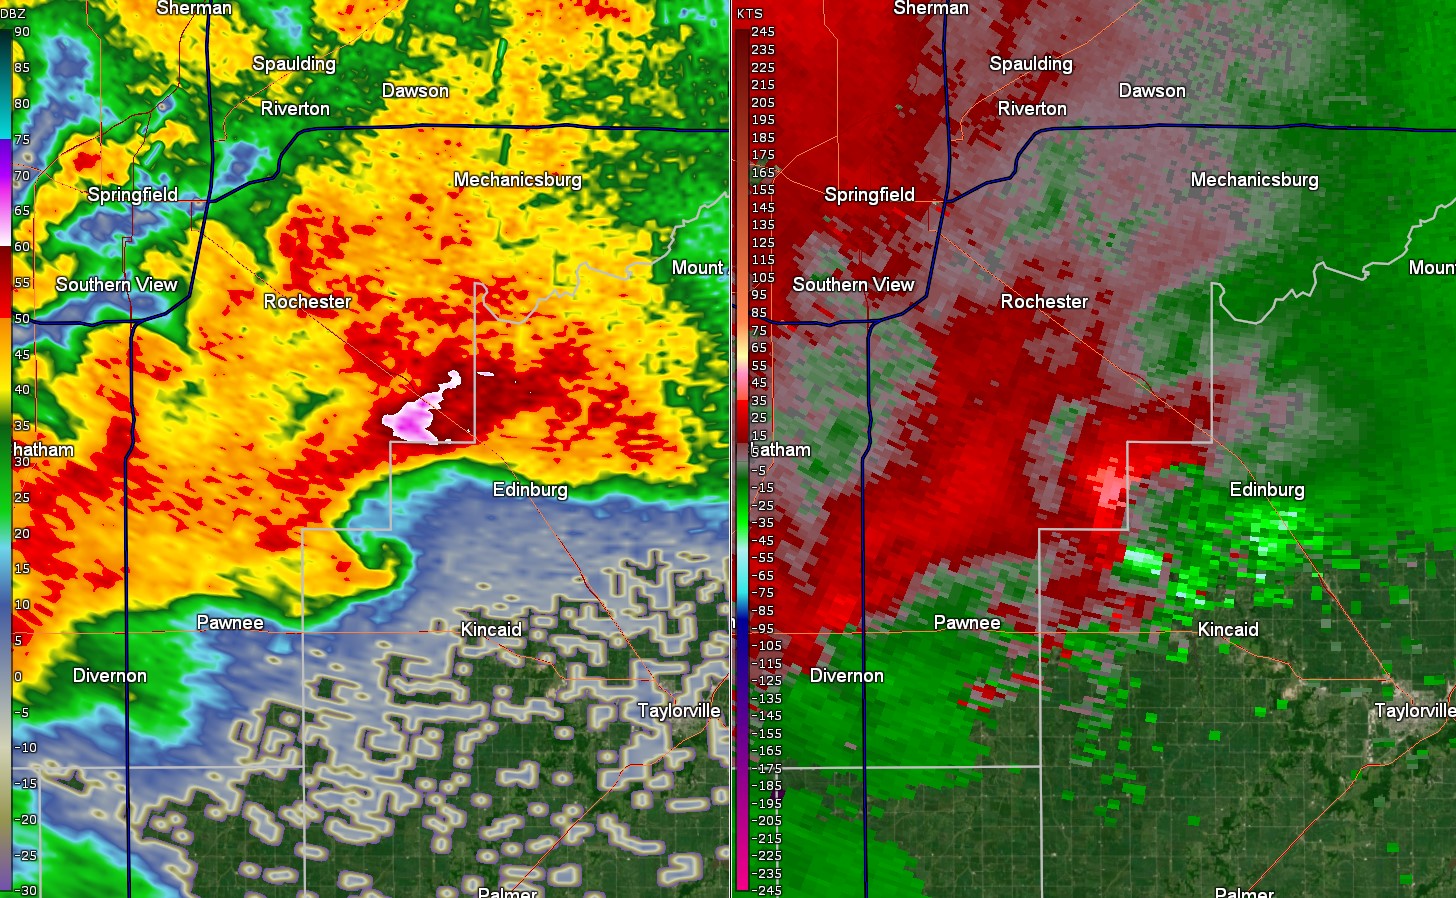 Reflectivity and storm relative motion image from 6:20 pm CDT